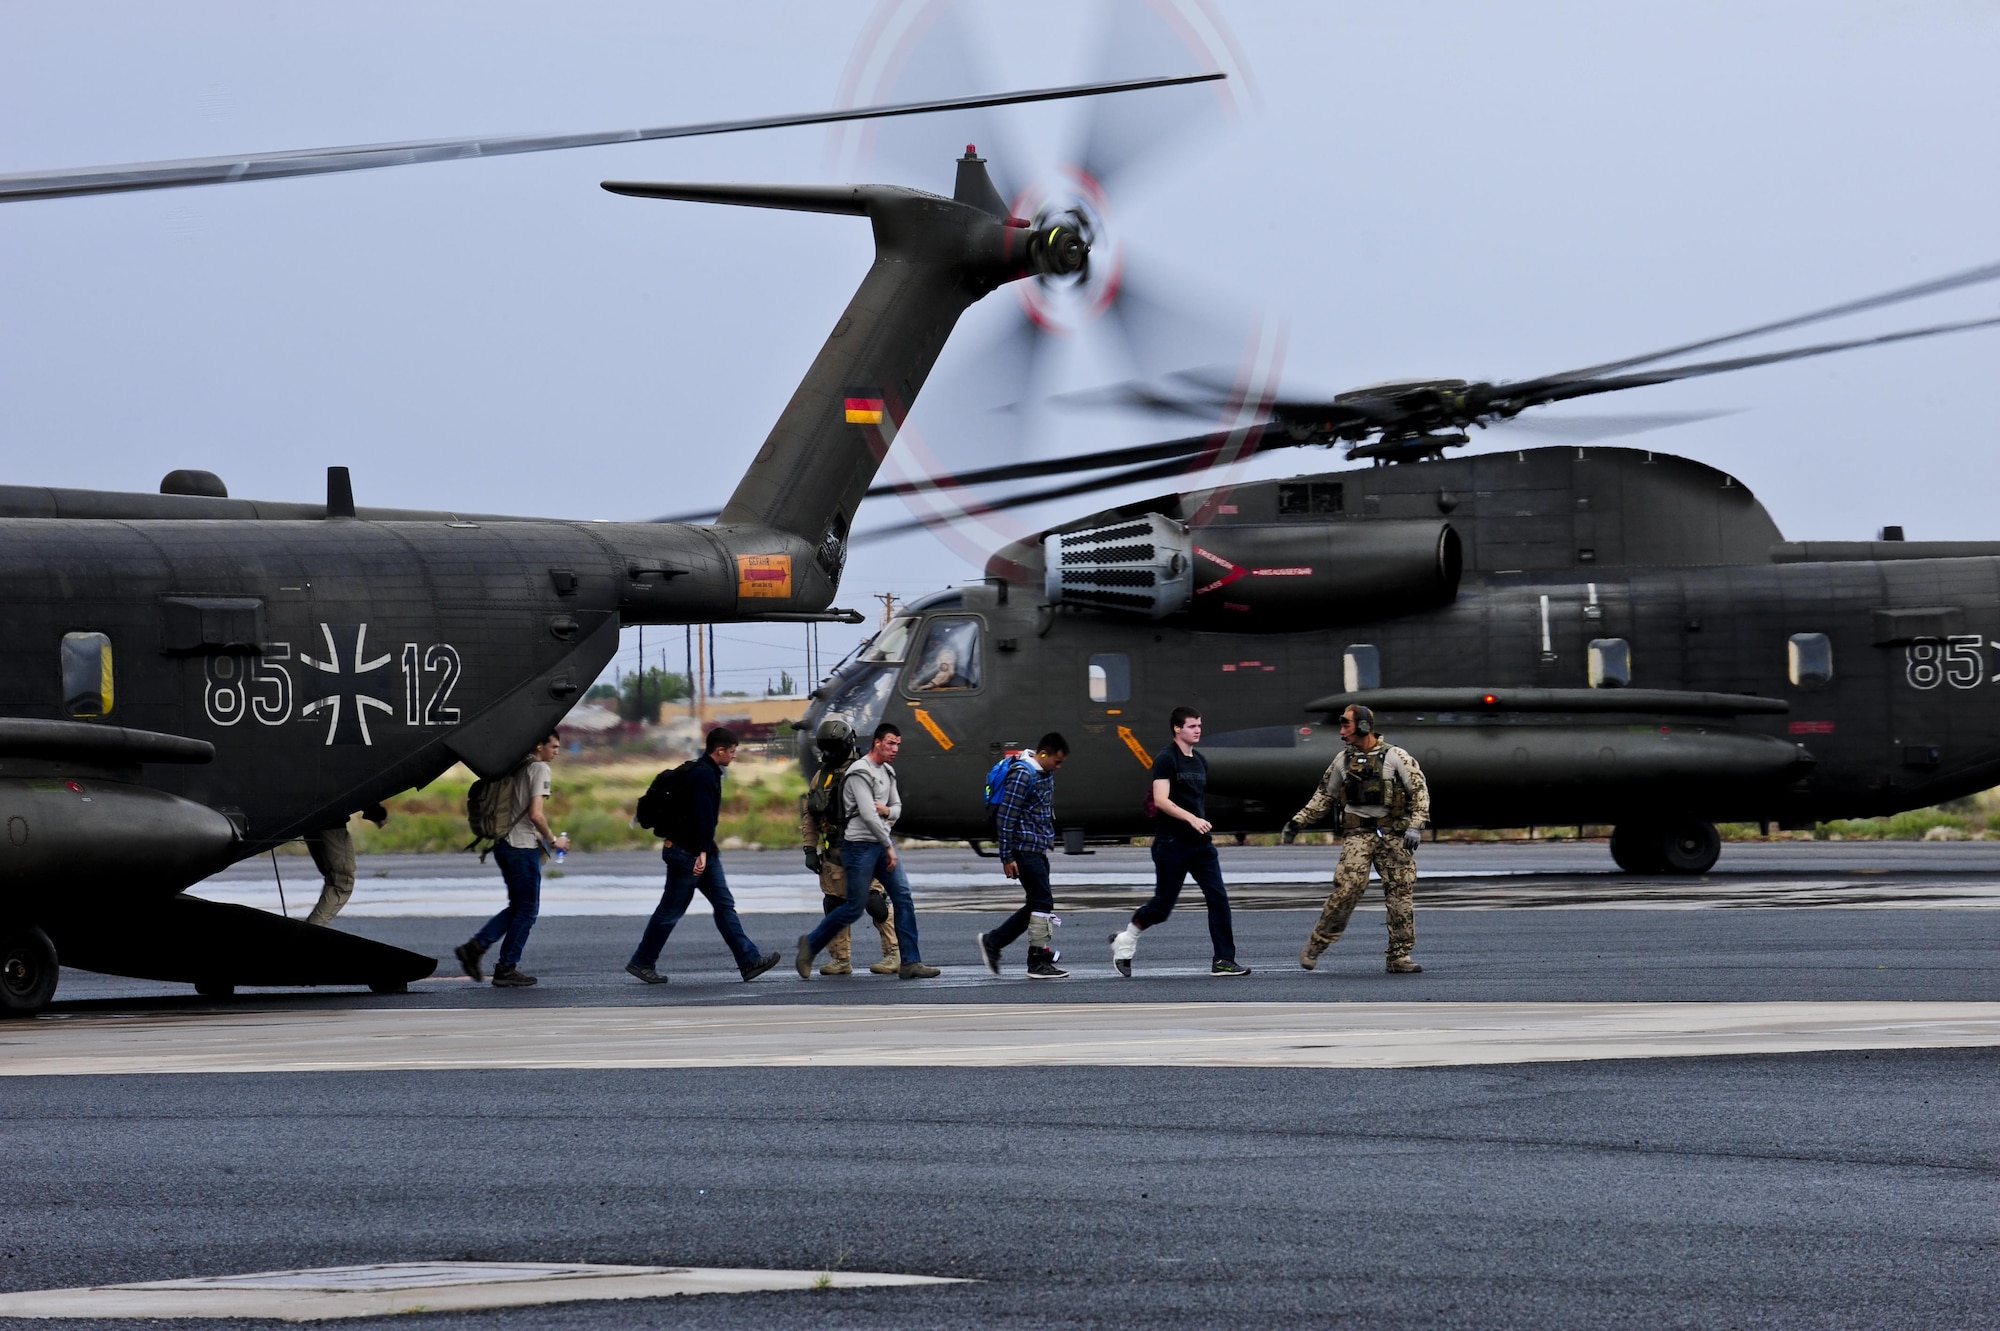 German air force rescue personnel lead simulated patients off of a German army CH-53GS during an Angel Thunder 2015 mass casualty exercise at Winslow-Lindbergh Regional Airport, Ariz., June 5, 2015. U.S. military forces and partner nations worked together during the exercise to transport patients from Camp Navajo Training Site, Ariz., to the casualty collection point located at the Winslow–Lindbergh Regional Airport. (U.S. Air Force photo/Airman 1st Class Chris Drzazgowski)